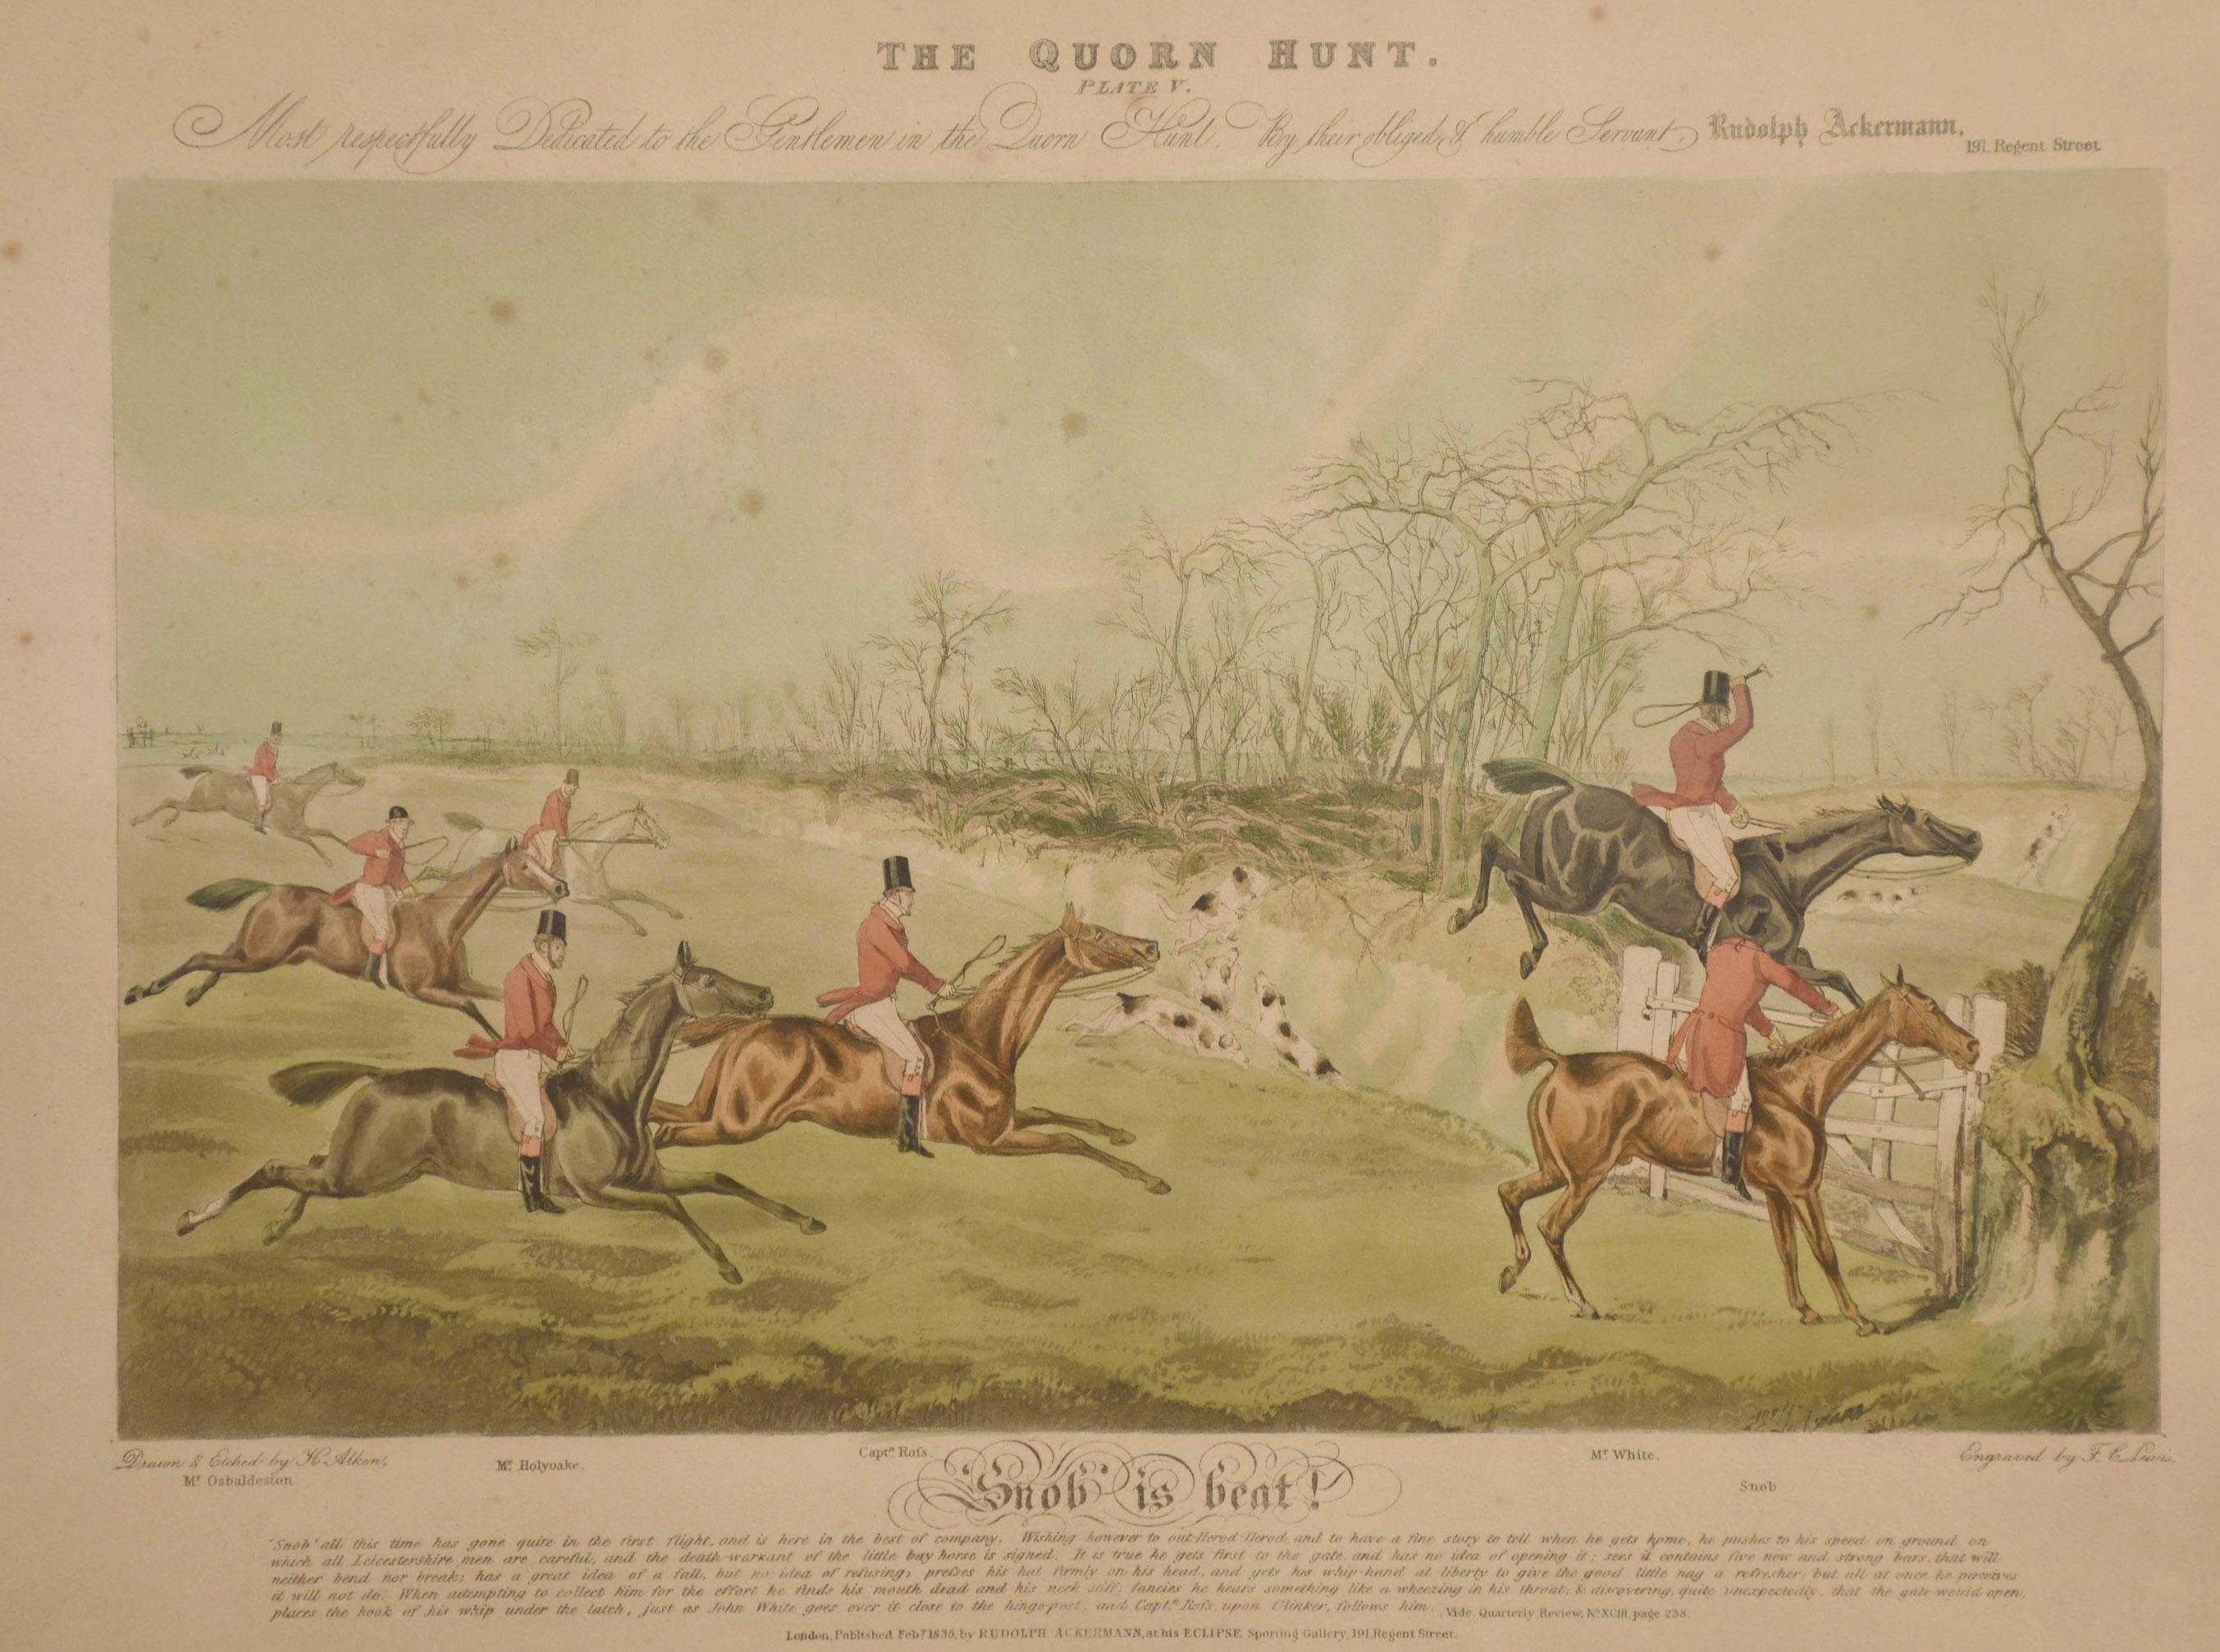 set of eight 19th-century hand-coloured Quorn Hunt prints after Henry Alken, published by Ackermann in 1835. Encased in oak frames.
Dimensions
Height 24 Inches
Width 31 Inches
Depth 1.5 Inches